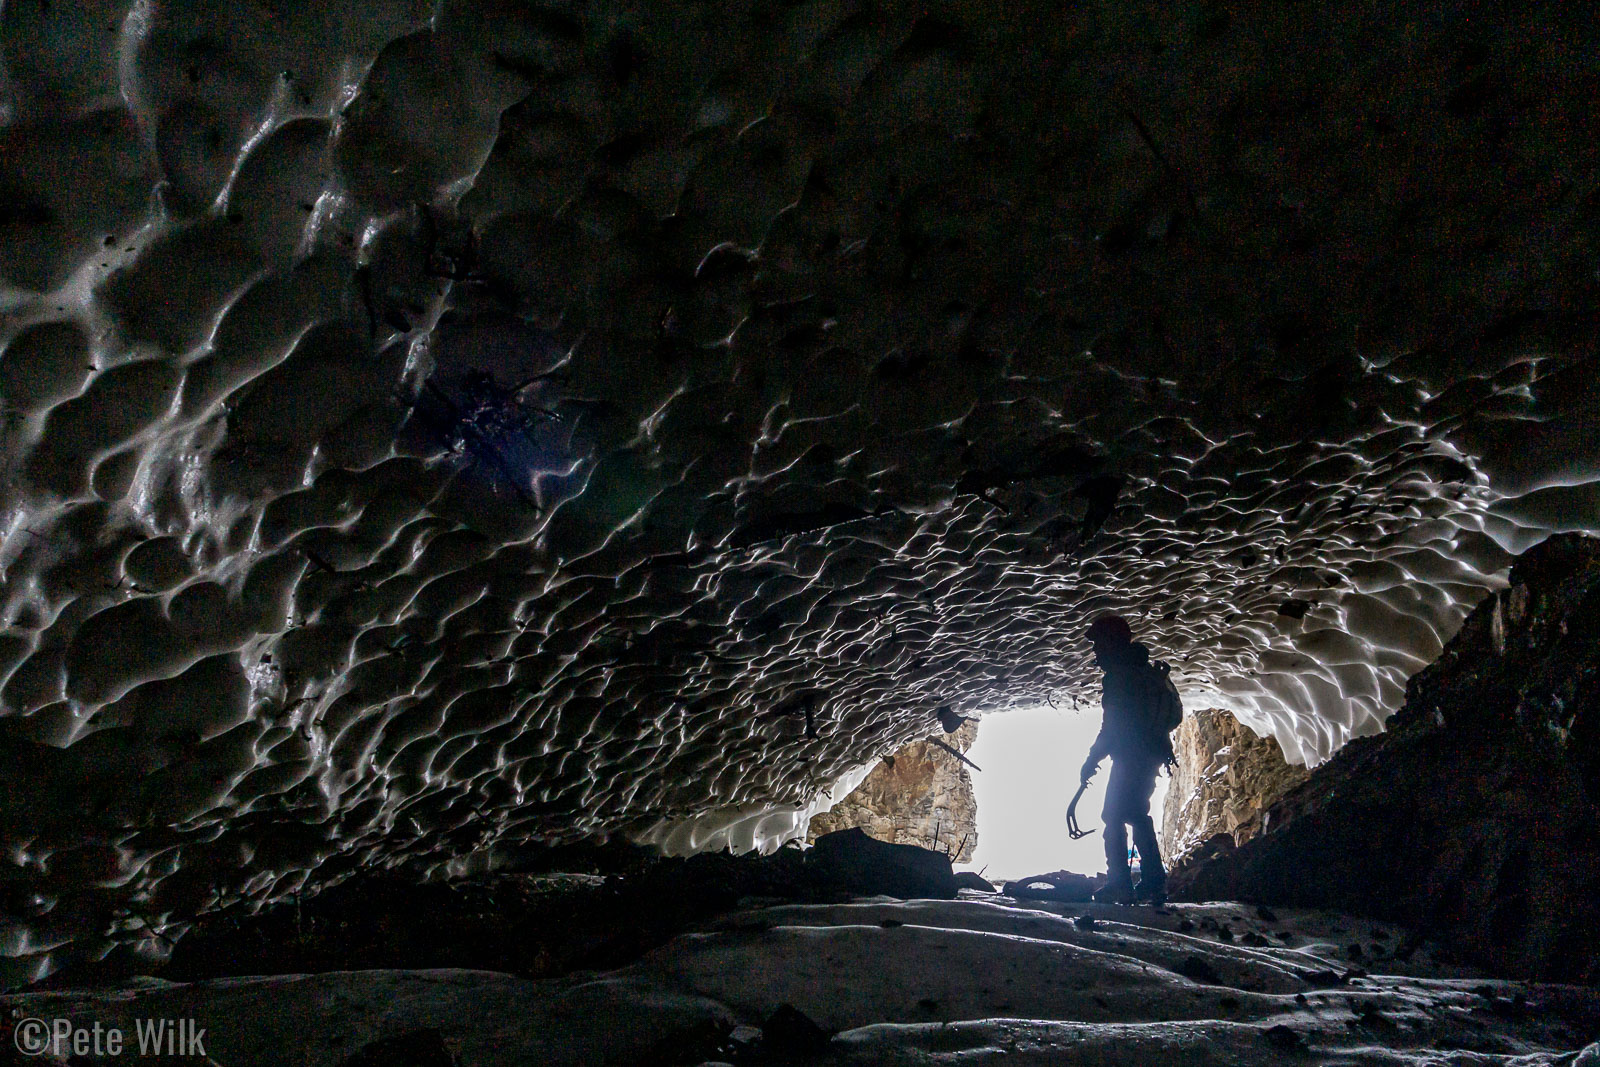 These tunnels where created by stream water melting avalanche debris from massive avalanches in March 2019.